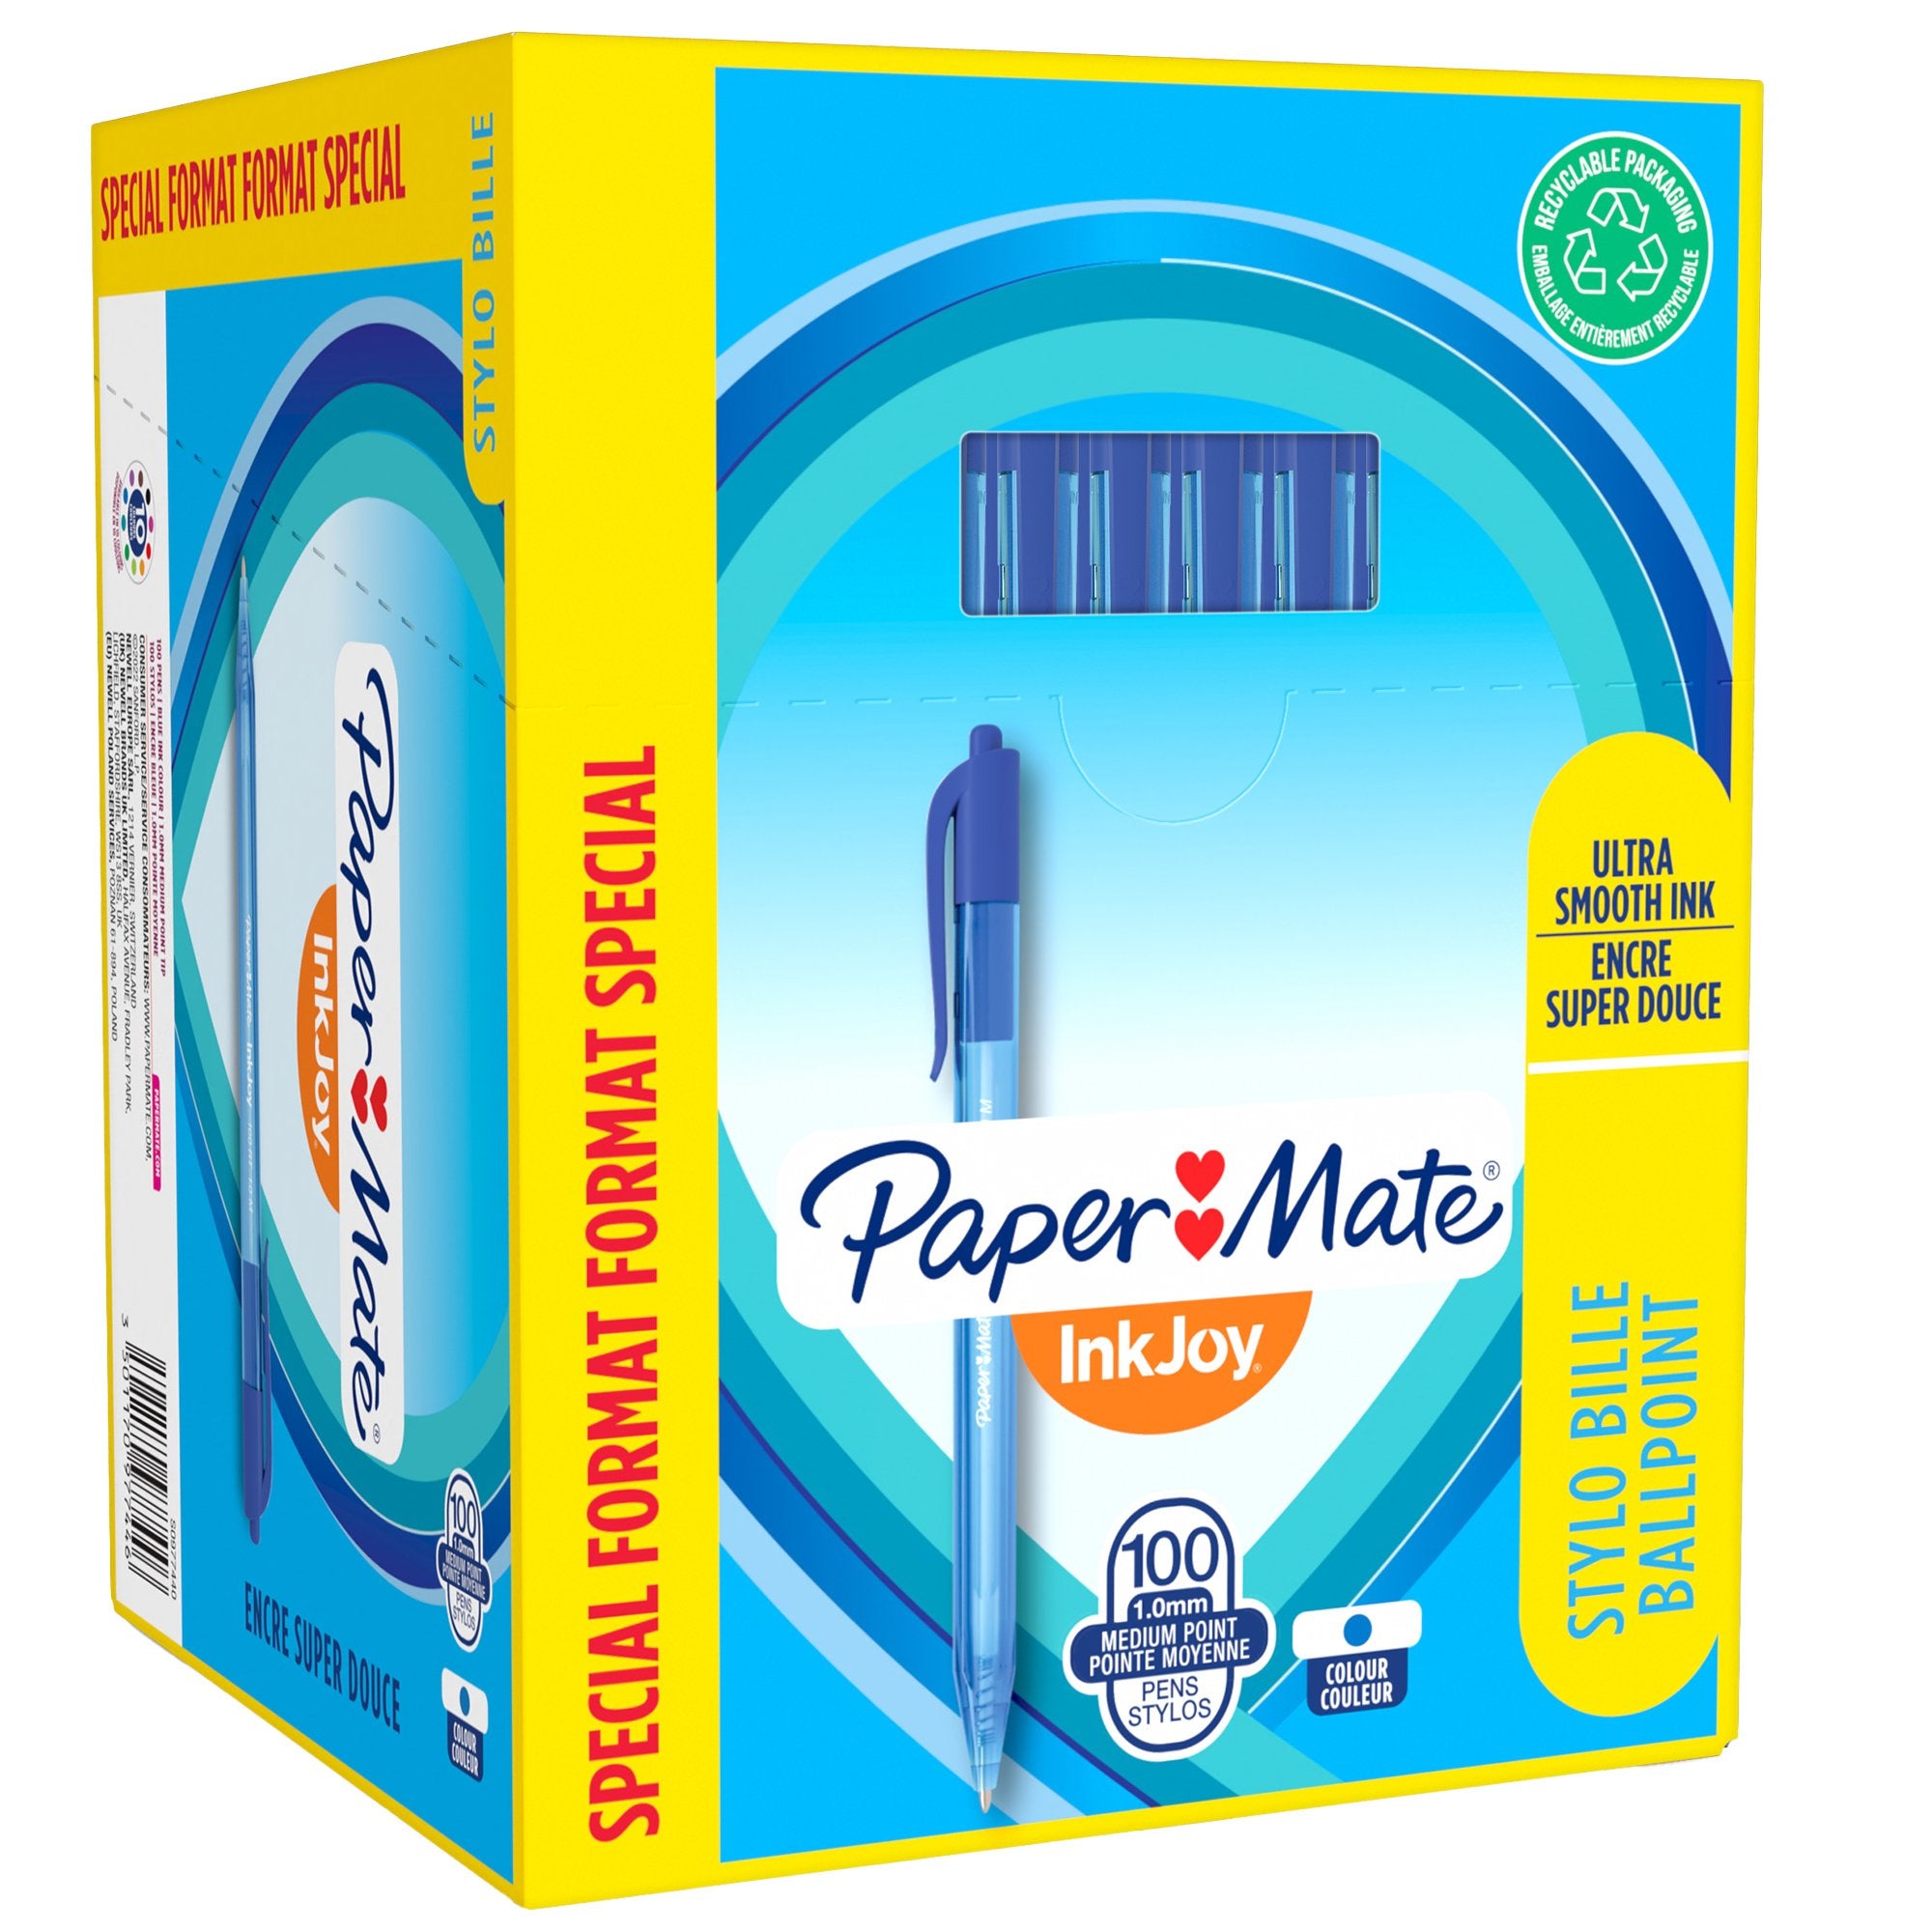 papermate-special-pack-8020-penna-sfera-scatto-inkjoy-stick-100rt-1-0mm-blu